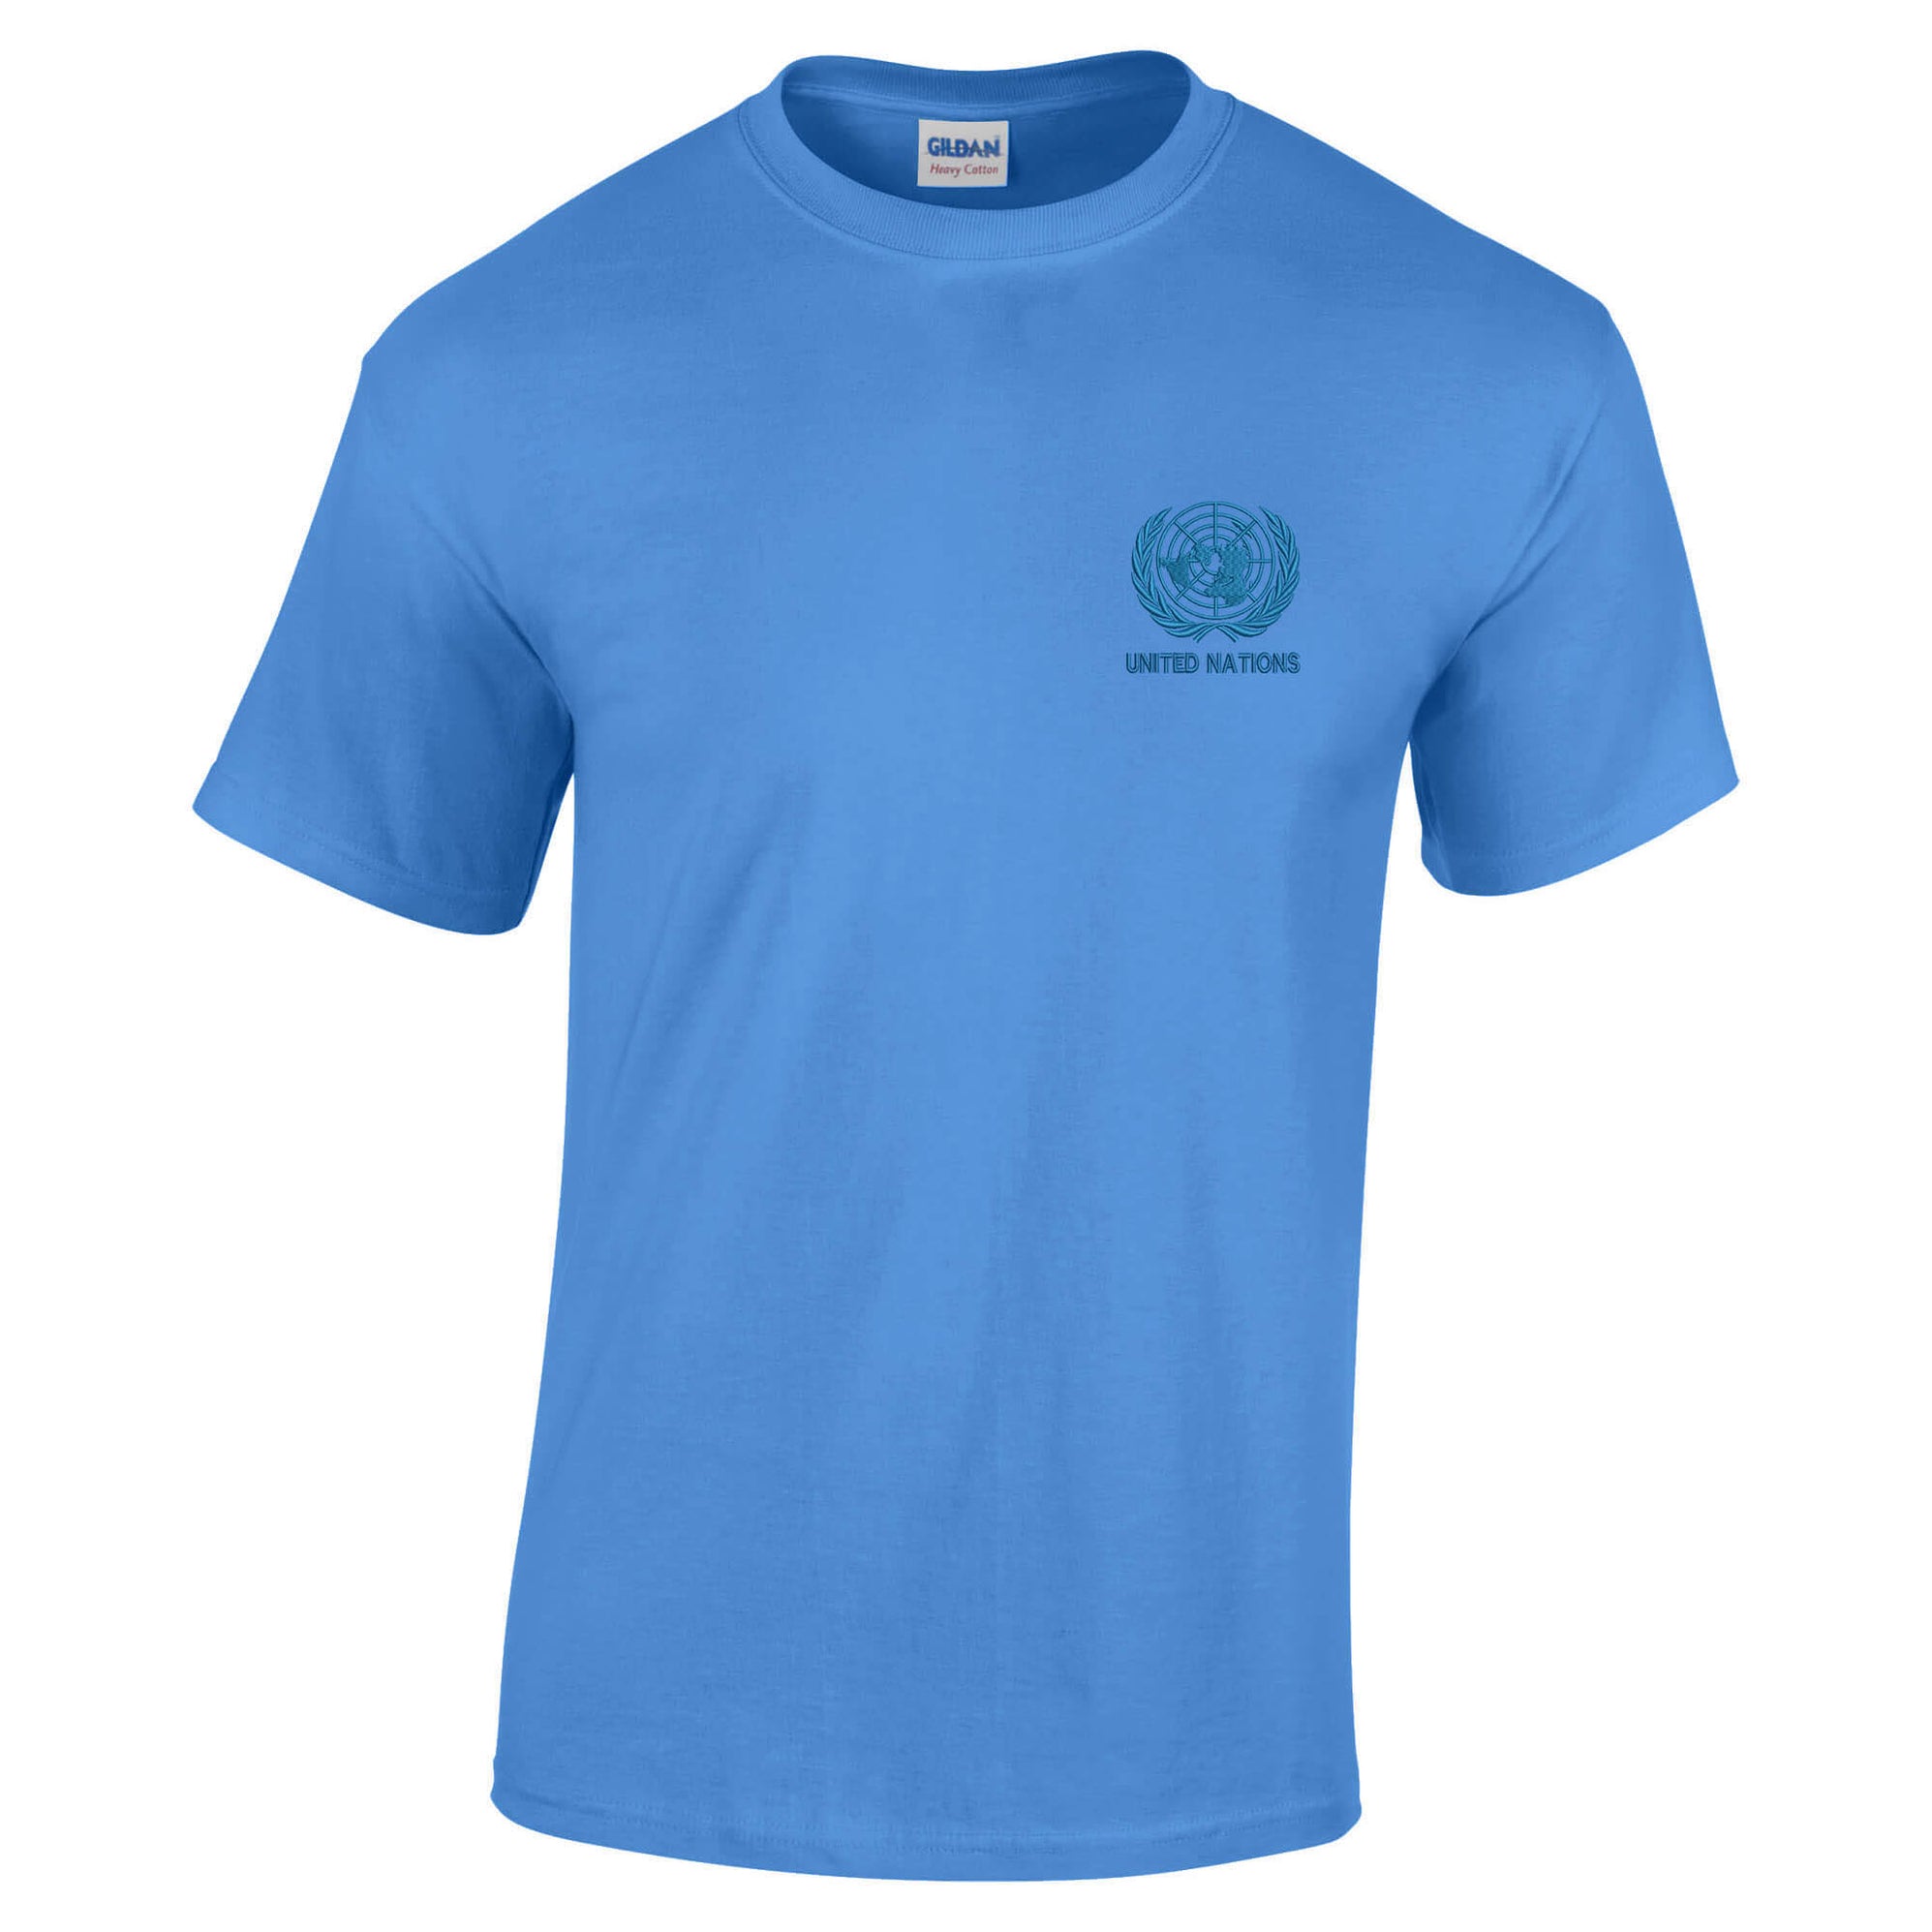 United Nations T-Shirt — The Military Store